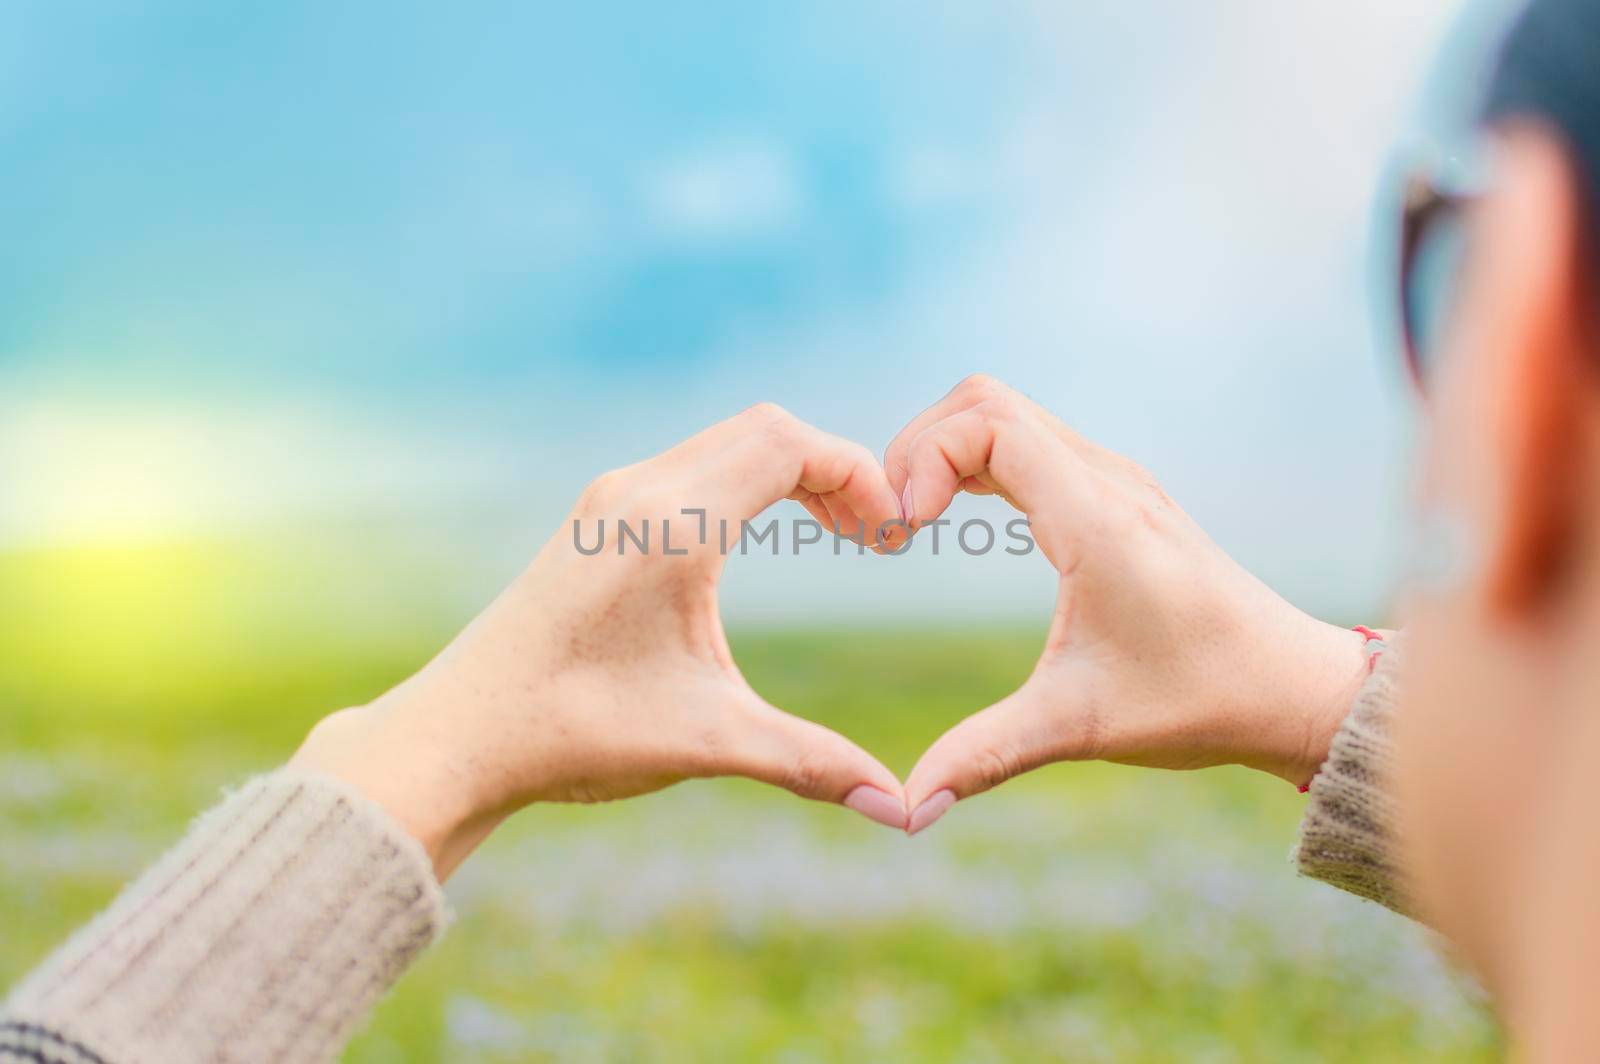 Hands together in a heart shape, woman's hands together in a heart shape, hands making a heart shape